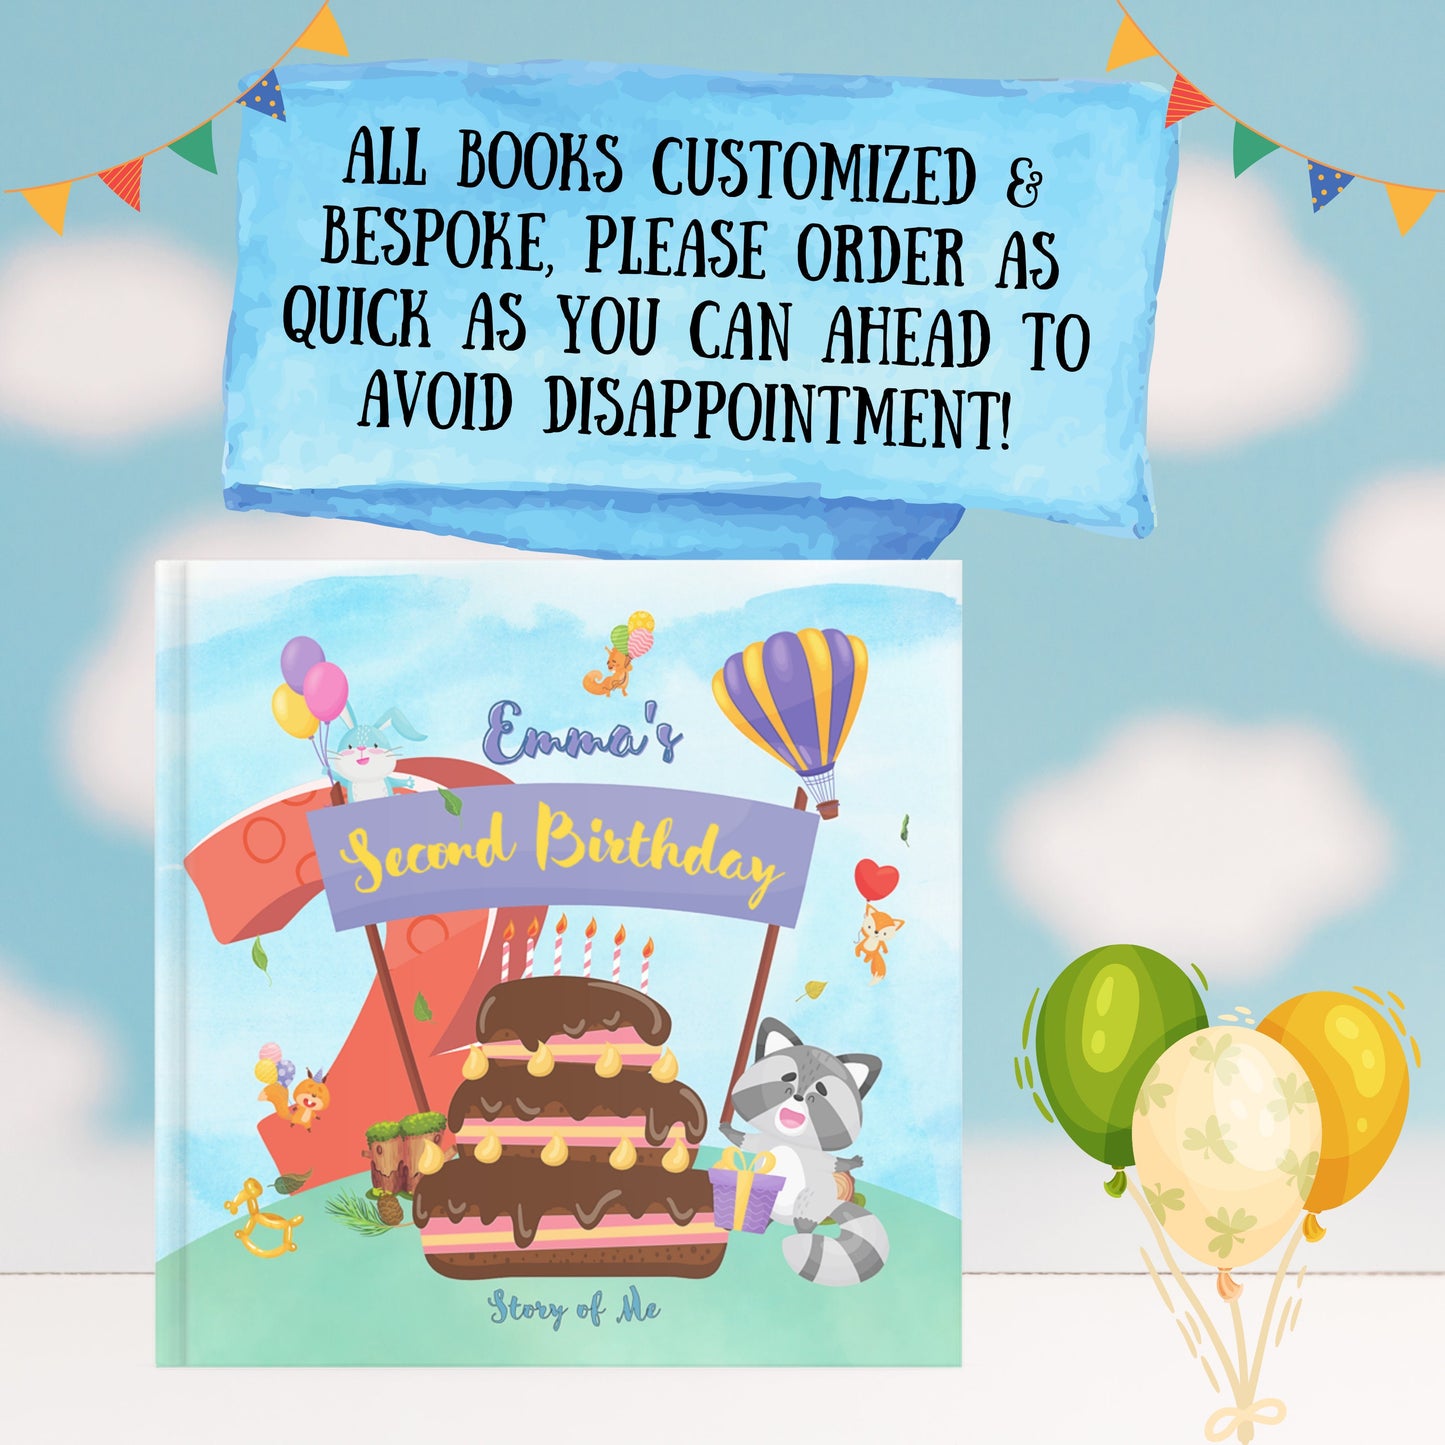 Personalized Second Birthday Book - Child's Second Birthday, Special Custom Kids Book Gift with Child Personalizations